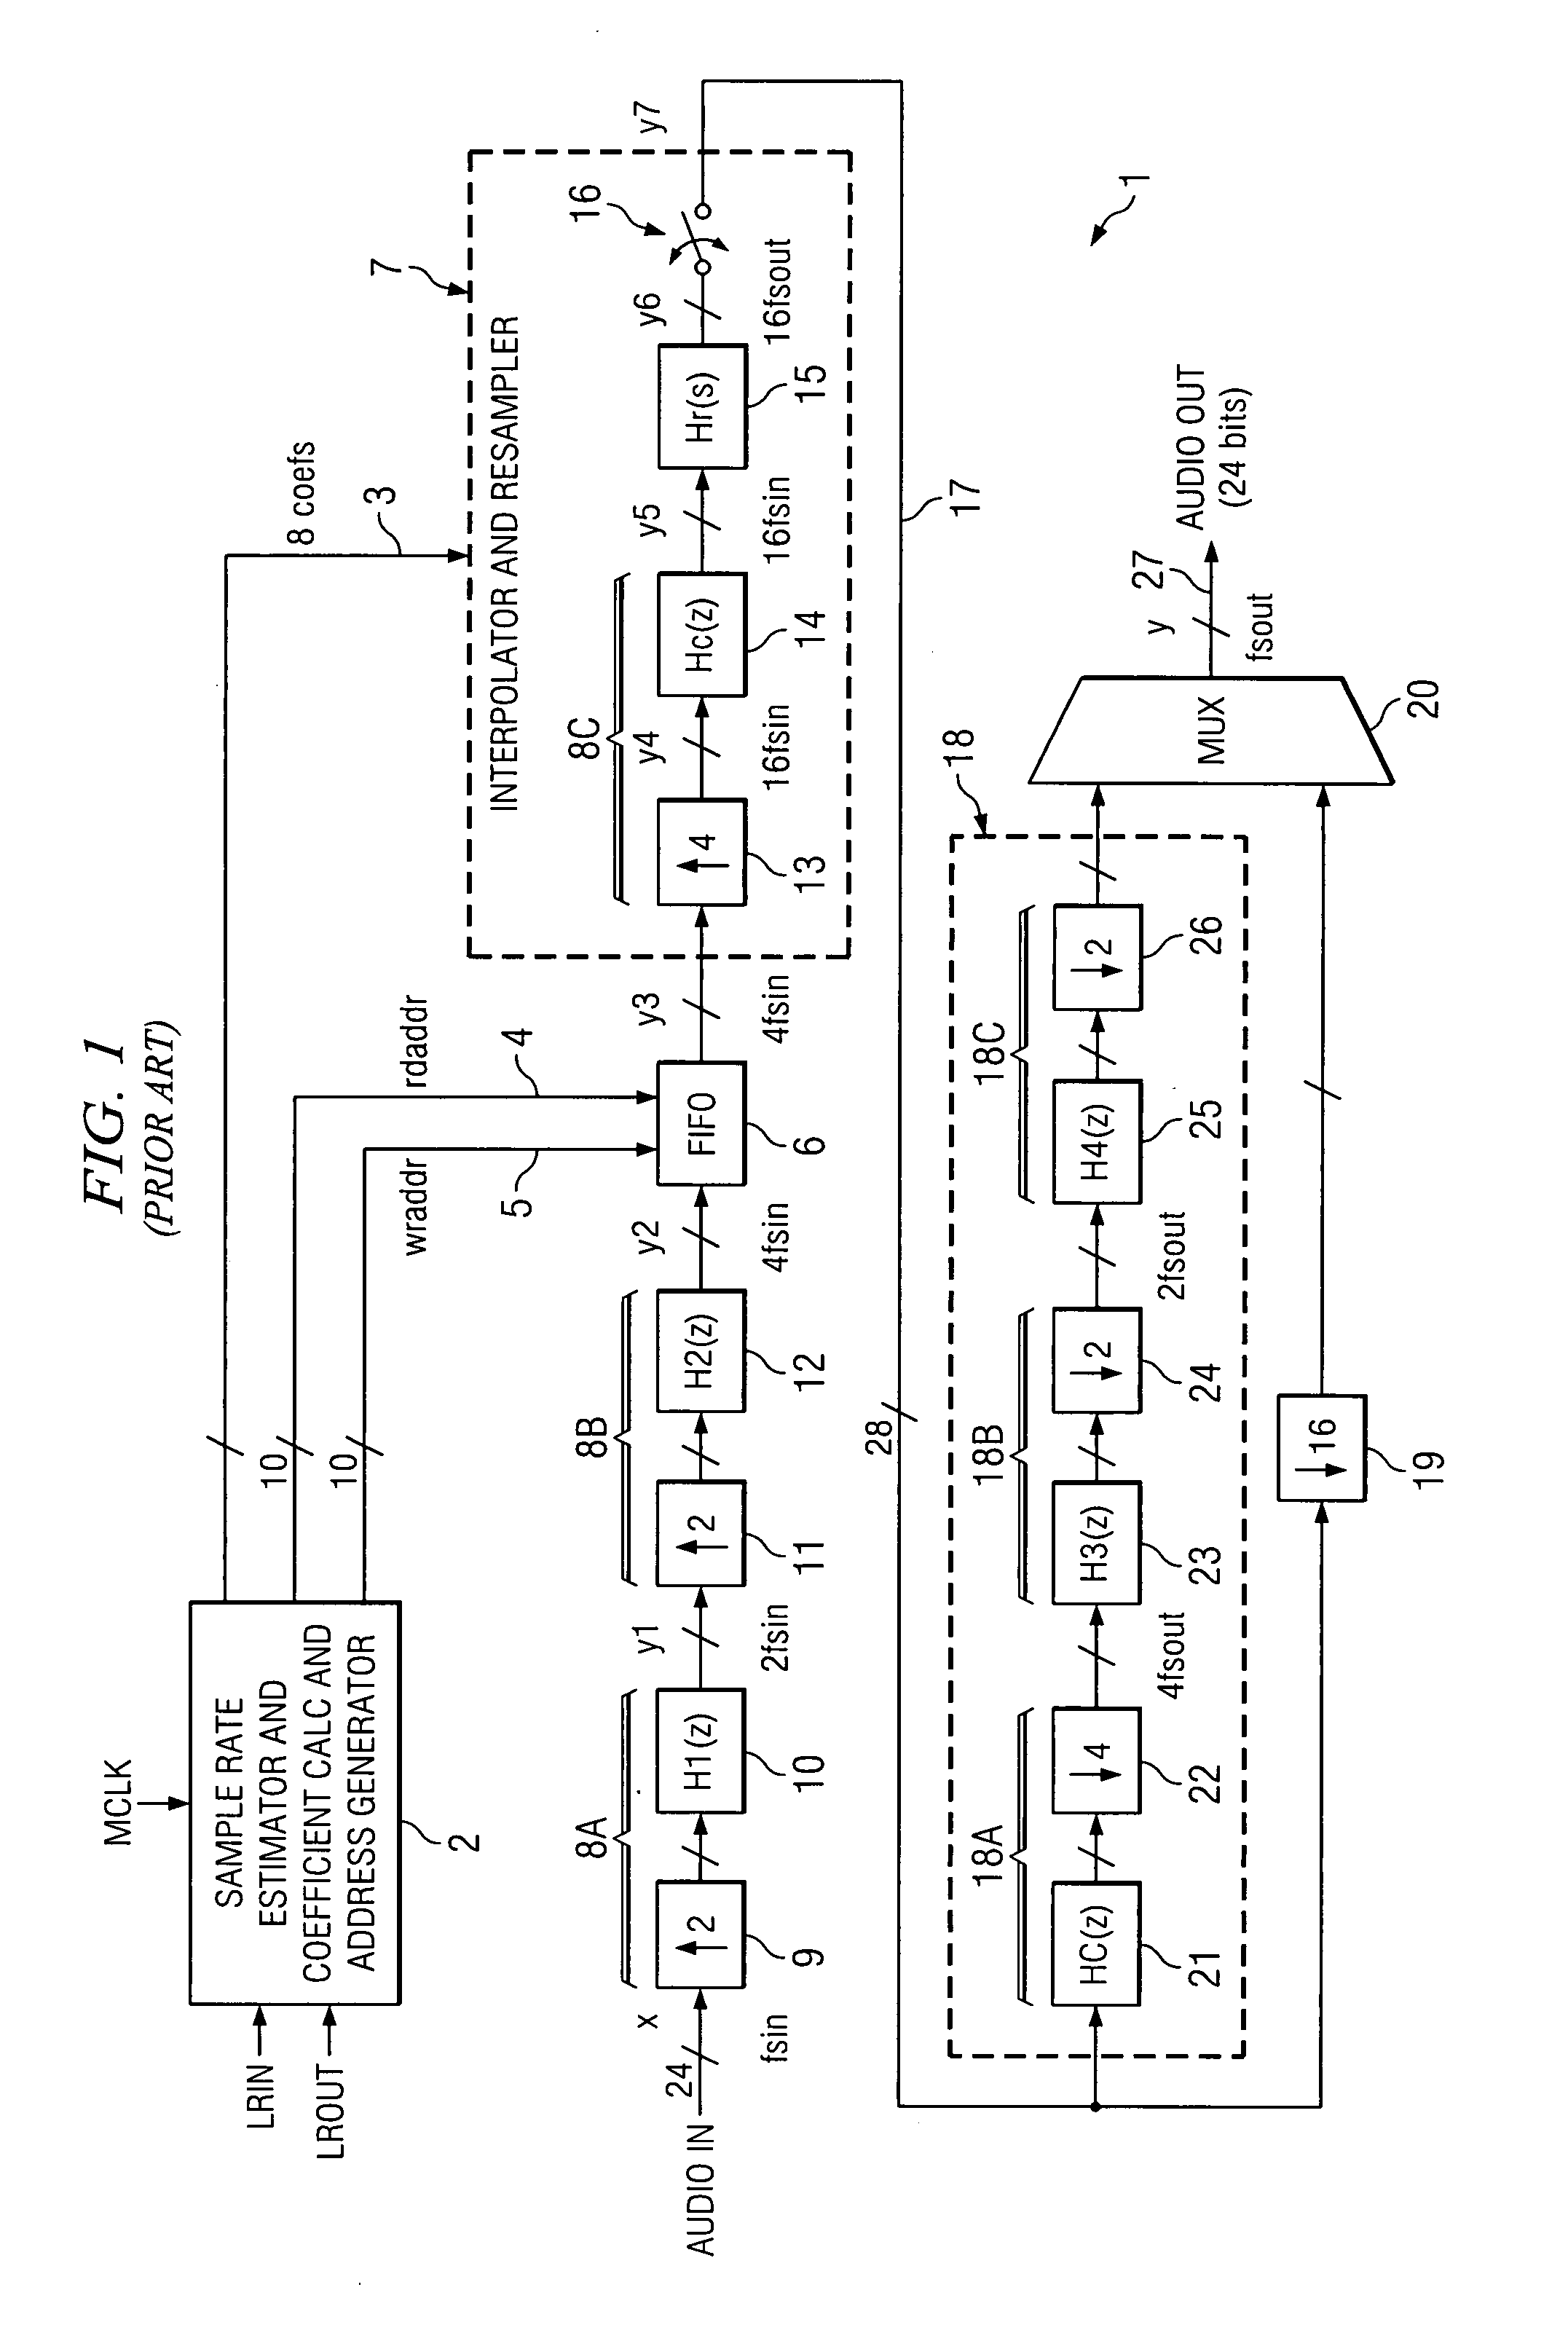 Asynchronous sampling rate converter and method for audio DAC